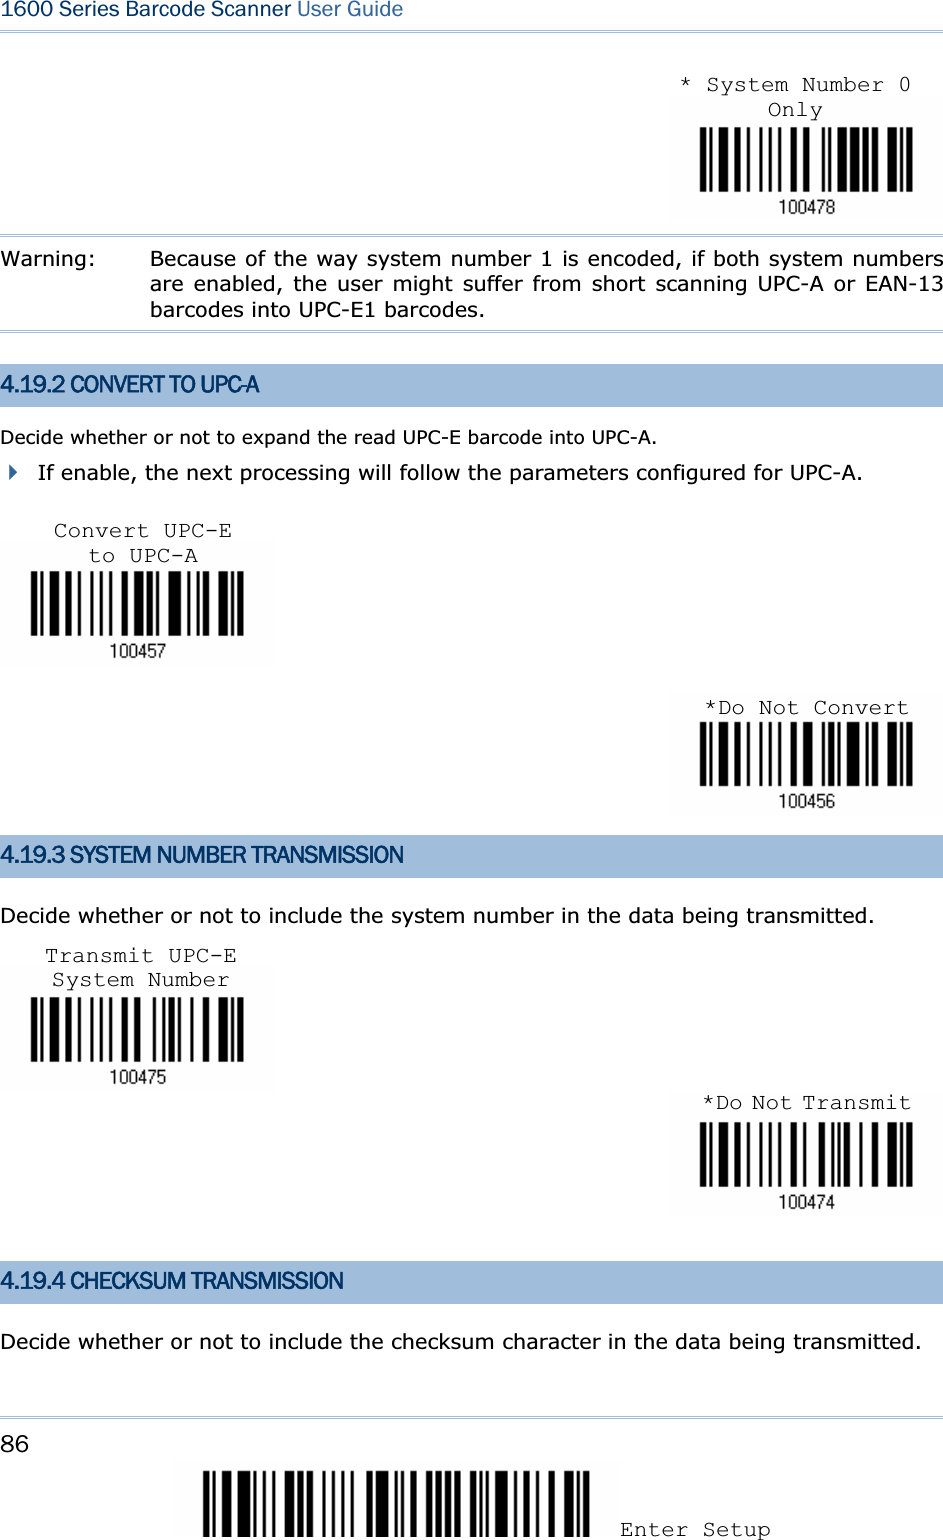 86Enter Setup 1600 Series Barcode Scanner User GuideWarning:  Because of the way system number 1 is encoded, if both system numbers are enabled, the user might suffer from short scanning UPC-A or EAN-13 barcodes into UPC-E1 barcodes. 4.19.2 CONVERT TO UPC-A Decide whether or not to expand the read UPC-E barcode into UPC-A.   If enable, the next processing will follow the parameters configured for UPC-A. 4.19.3 SYSTEM NUMBER TRANSMISSION Decide whether or not to include the system number in the data being transmitted. 4.19.4 CHECKSUM TRANSMISSION Decide whether or not to include the checksum character in the data being transmitted. Convert UPC-E to UPC-A*Do Not Convert*Do Not TransmitTransmit UPC-E System Number* System Number 0 Only